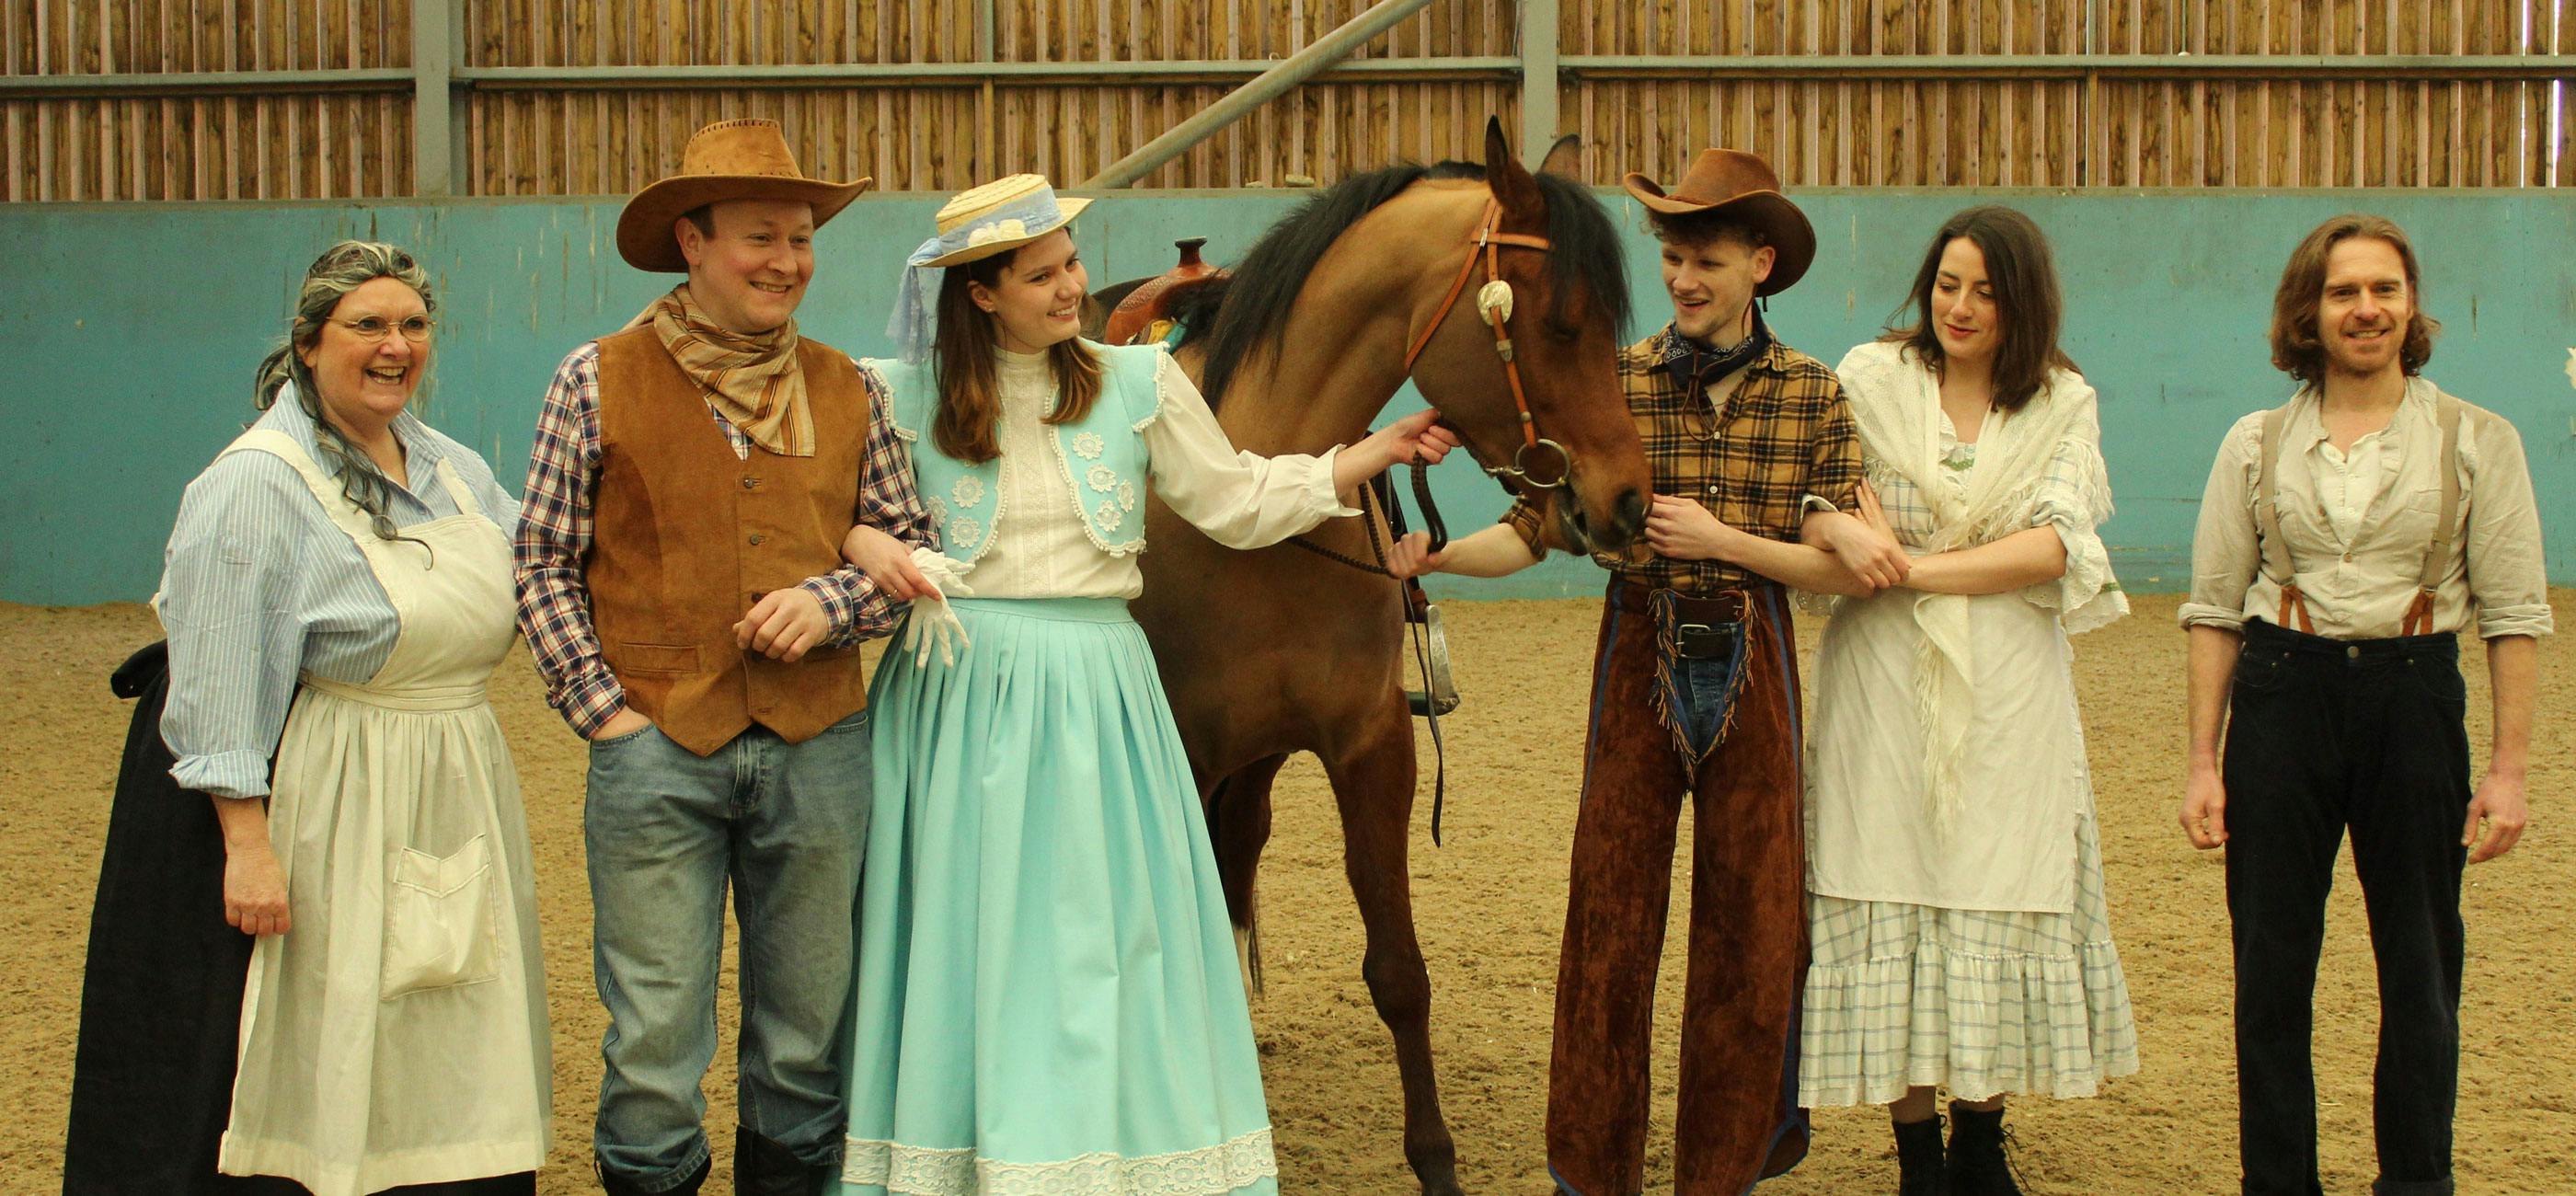 Oklahoma cast dressed like cowboy style with a horse